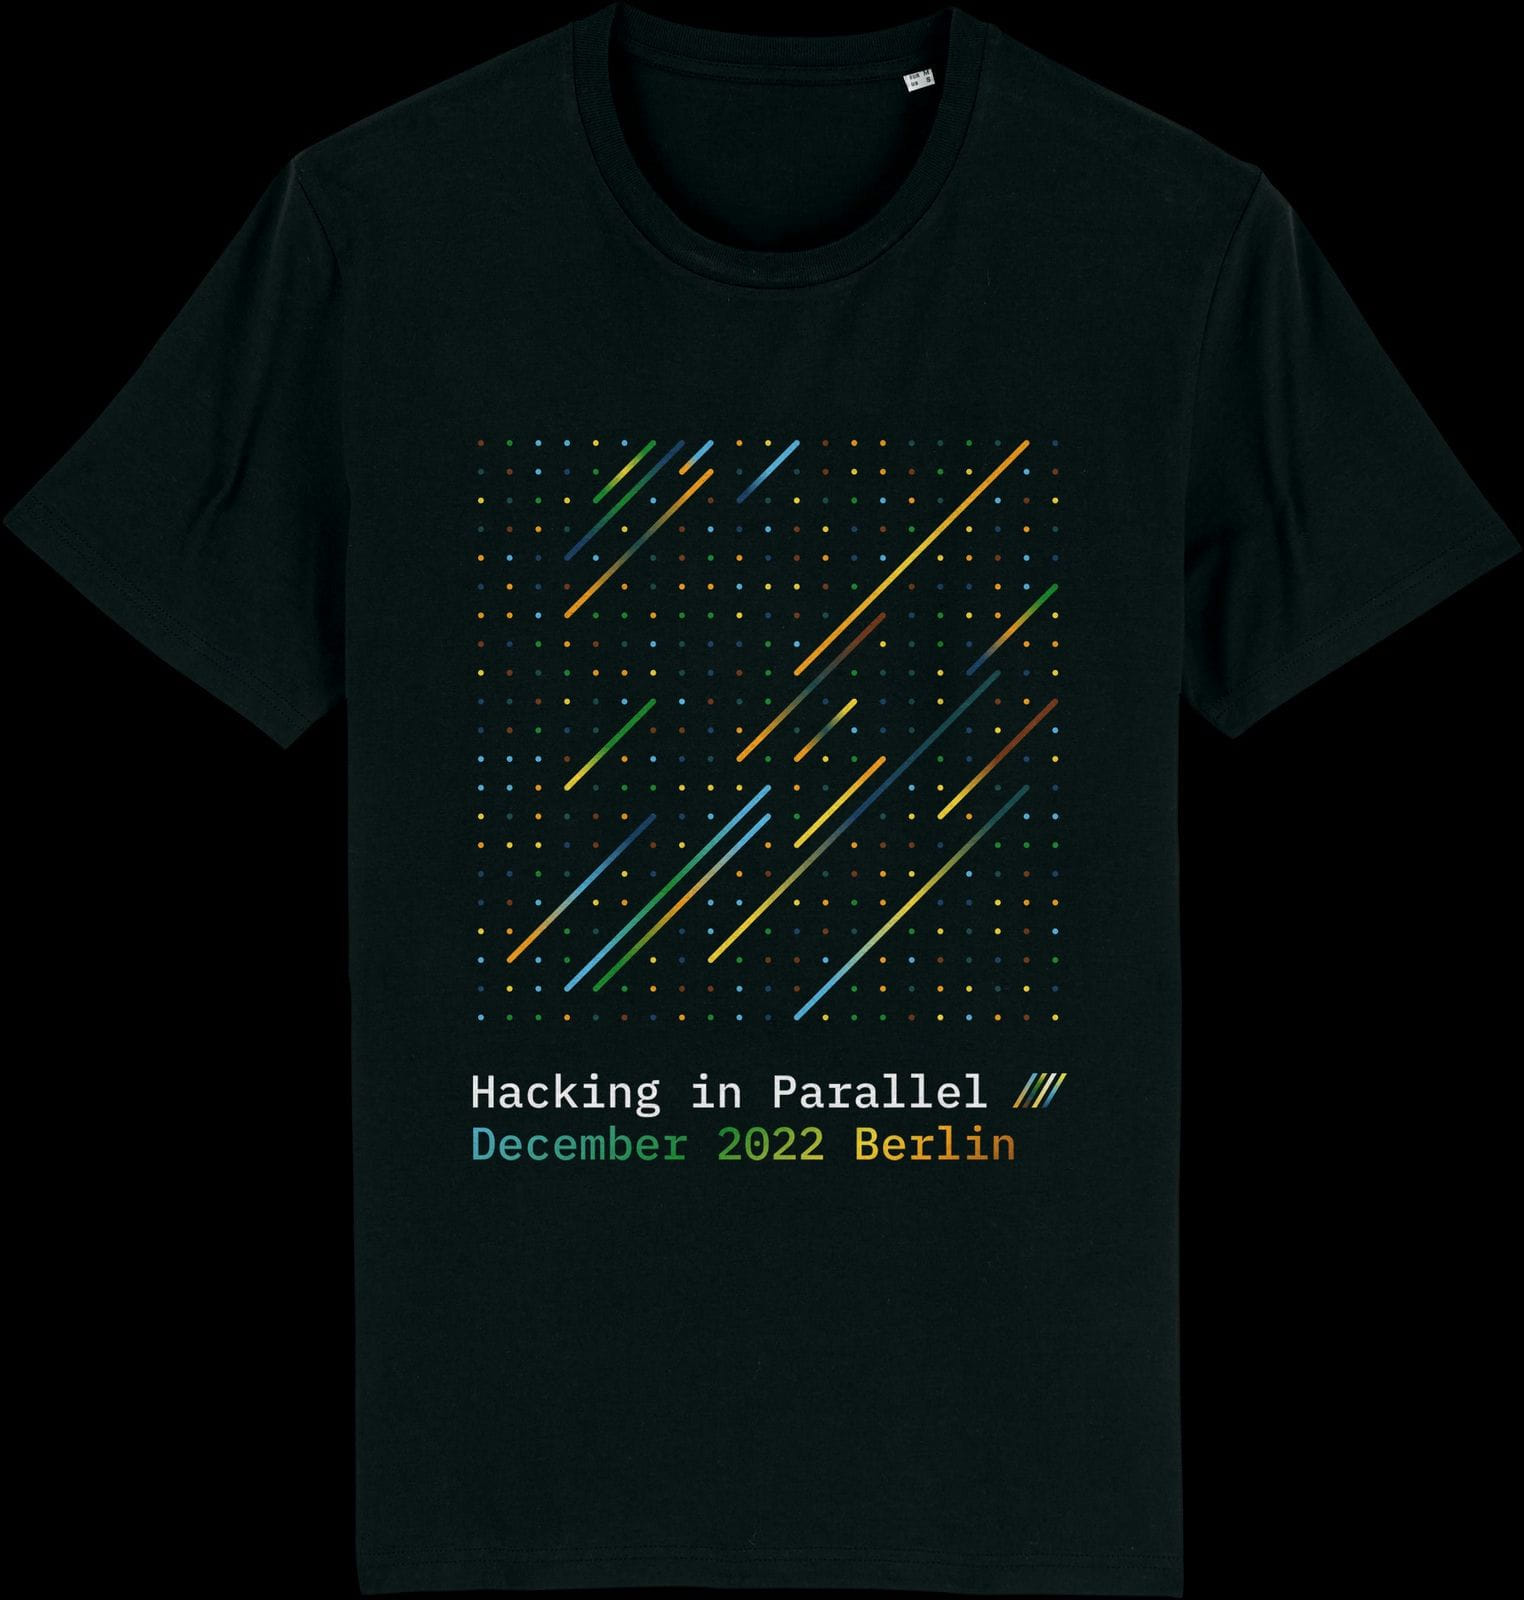 Hacking in Parallel Berlin 2022 Shirt with a colorful print of a geometric grid with several gradient lines going from bottom left to top right on the front of the shirt